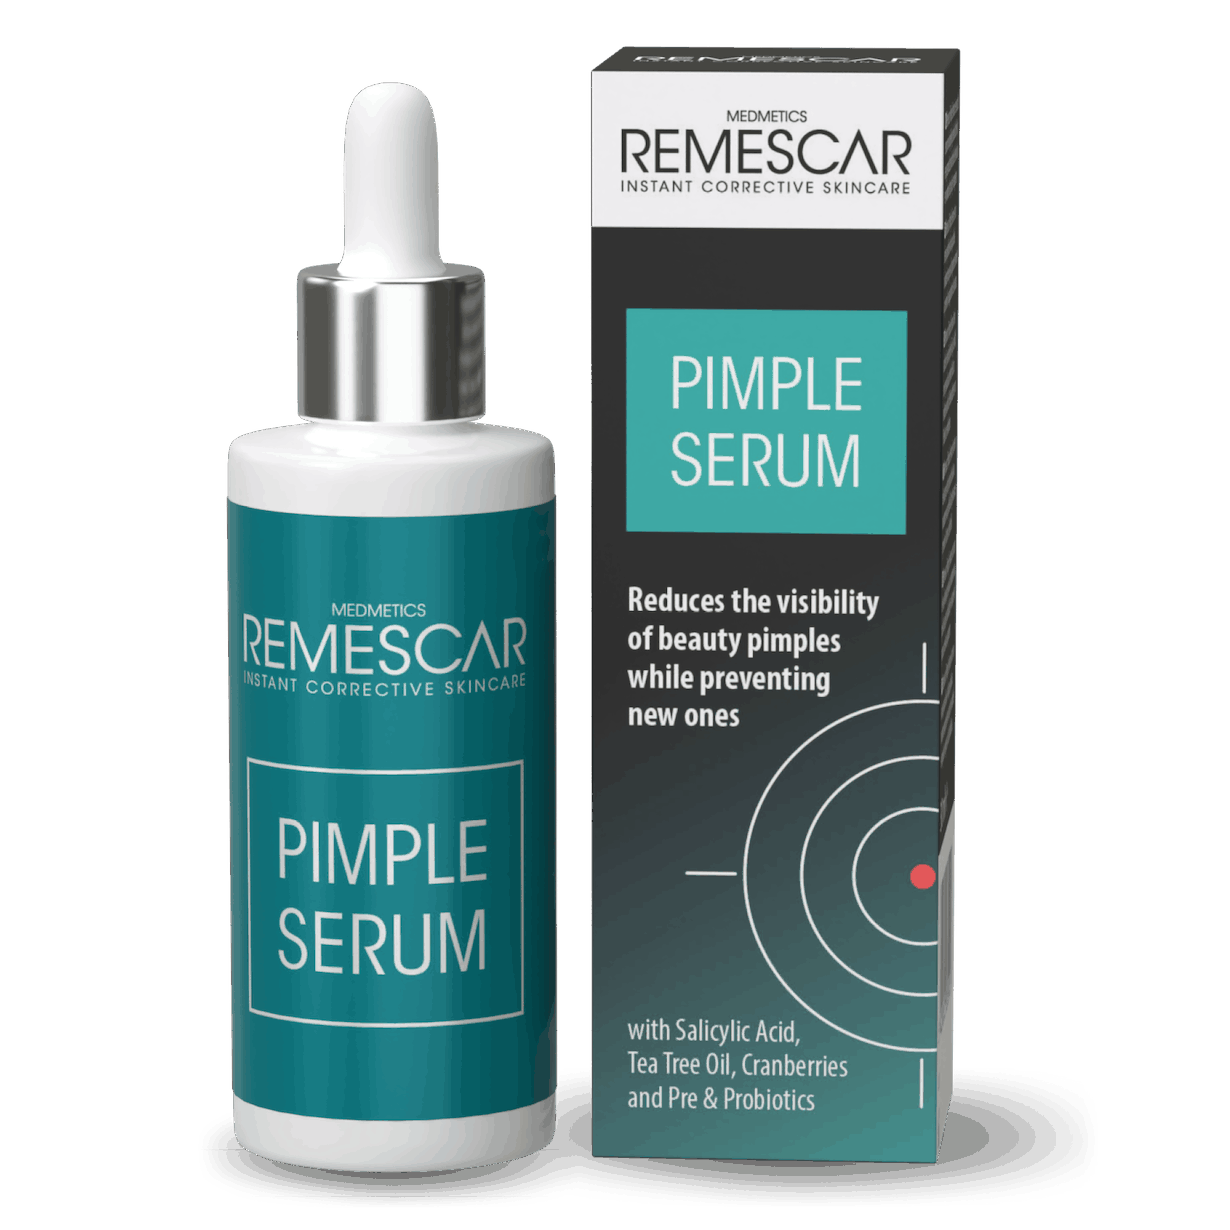 Https 3 A 2 F 2 Fremescar com 2 Fvolumes 2 Fproducts 2 Fremescar pdp pictures website and amazon 2000x2000px pimple serum